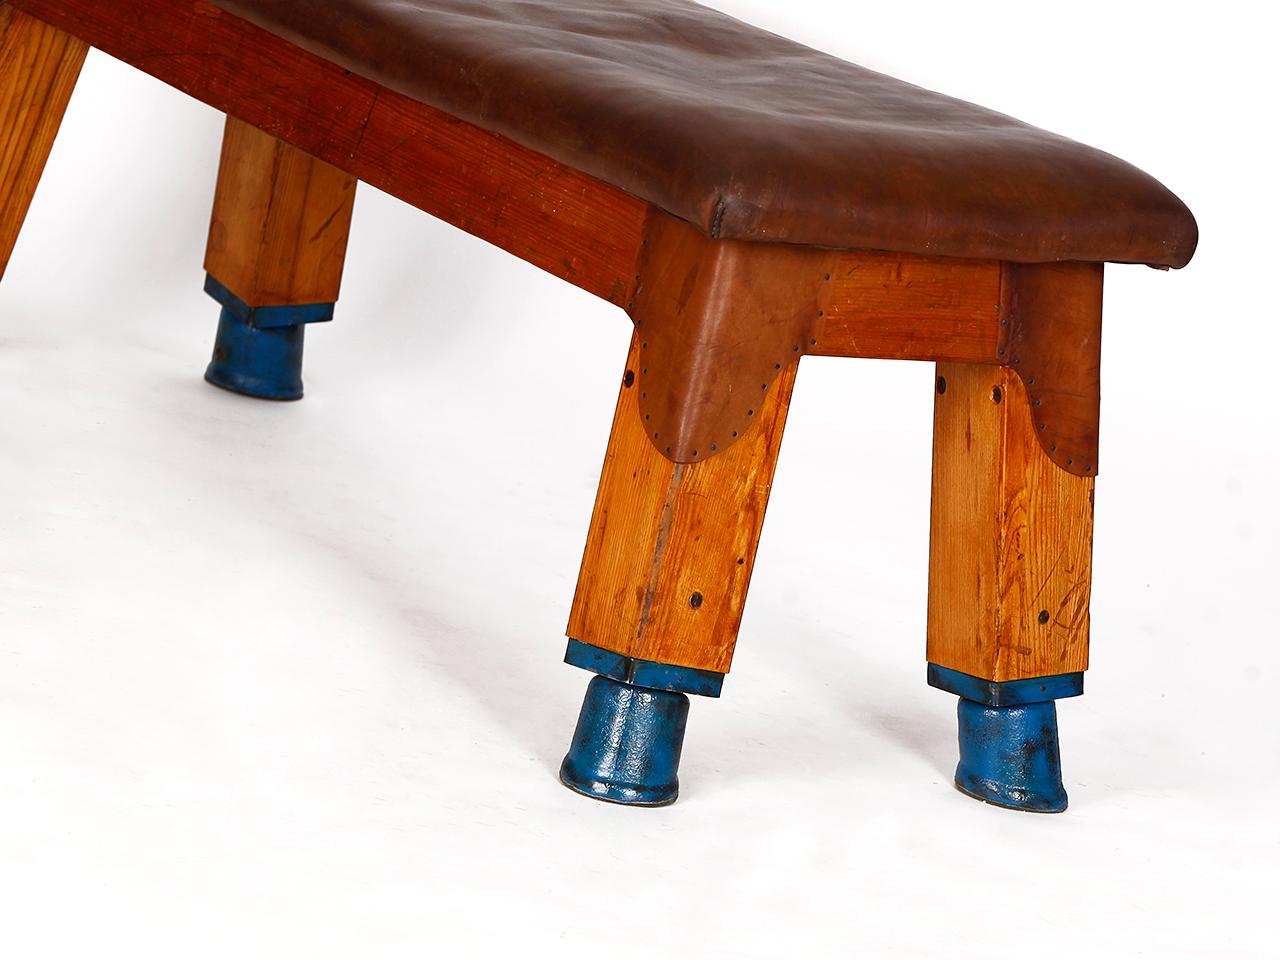 Gymnastic Vintage Leather Pommel Horse Gym Bench Top, 1930s In Good Condition For Sale In Wien, AT